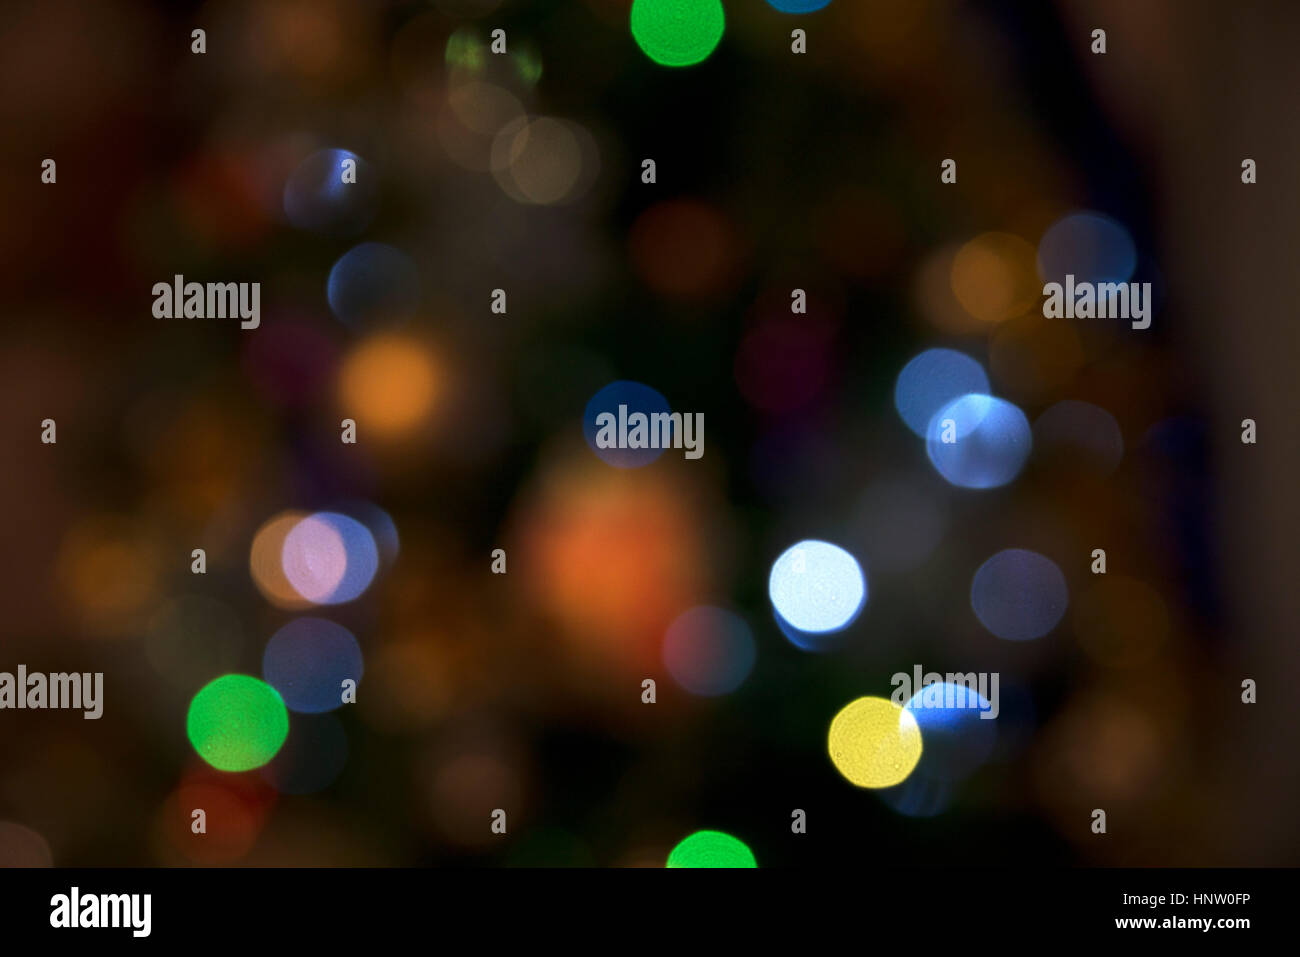 abstruct unfocused red orange blue green and yellow circle lights Stock Photo